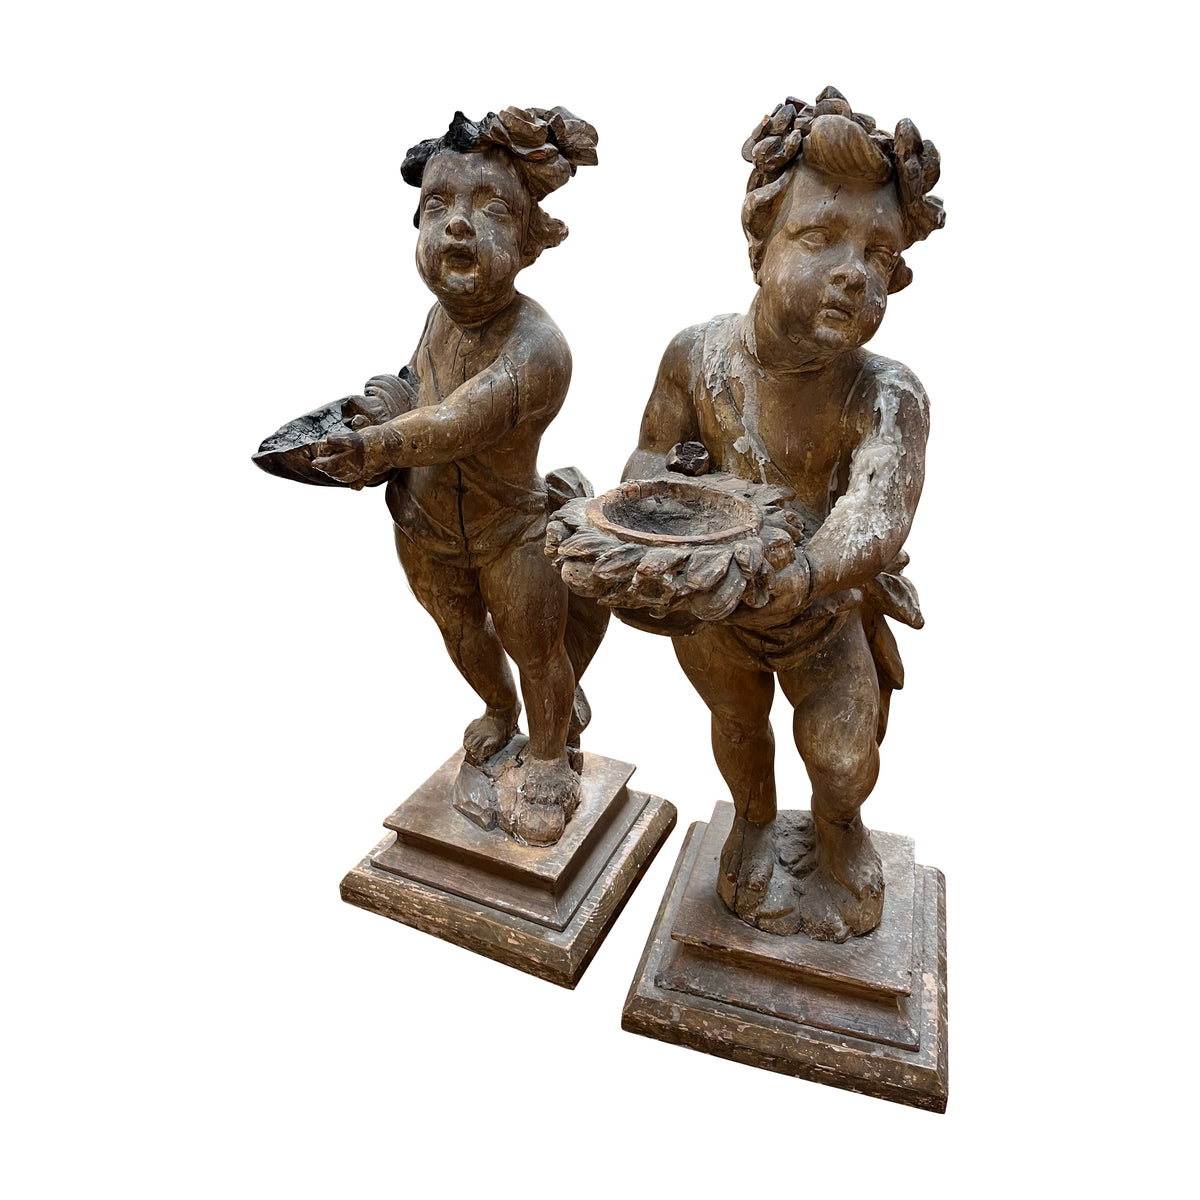 Pair of Large Baroque Cherubs, Late 17th to Early 18th Century